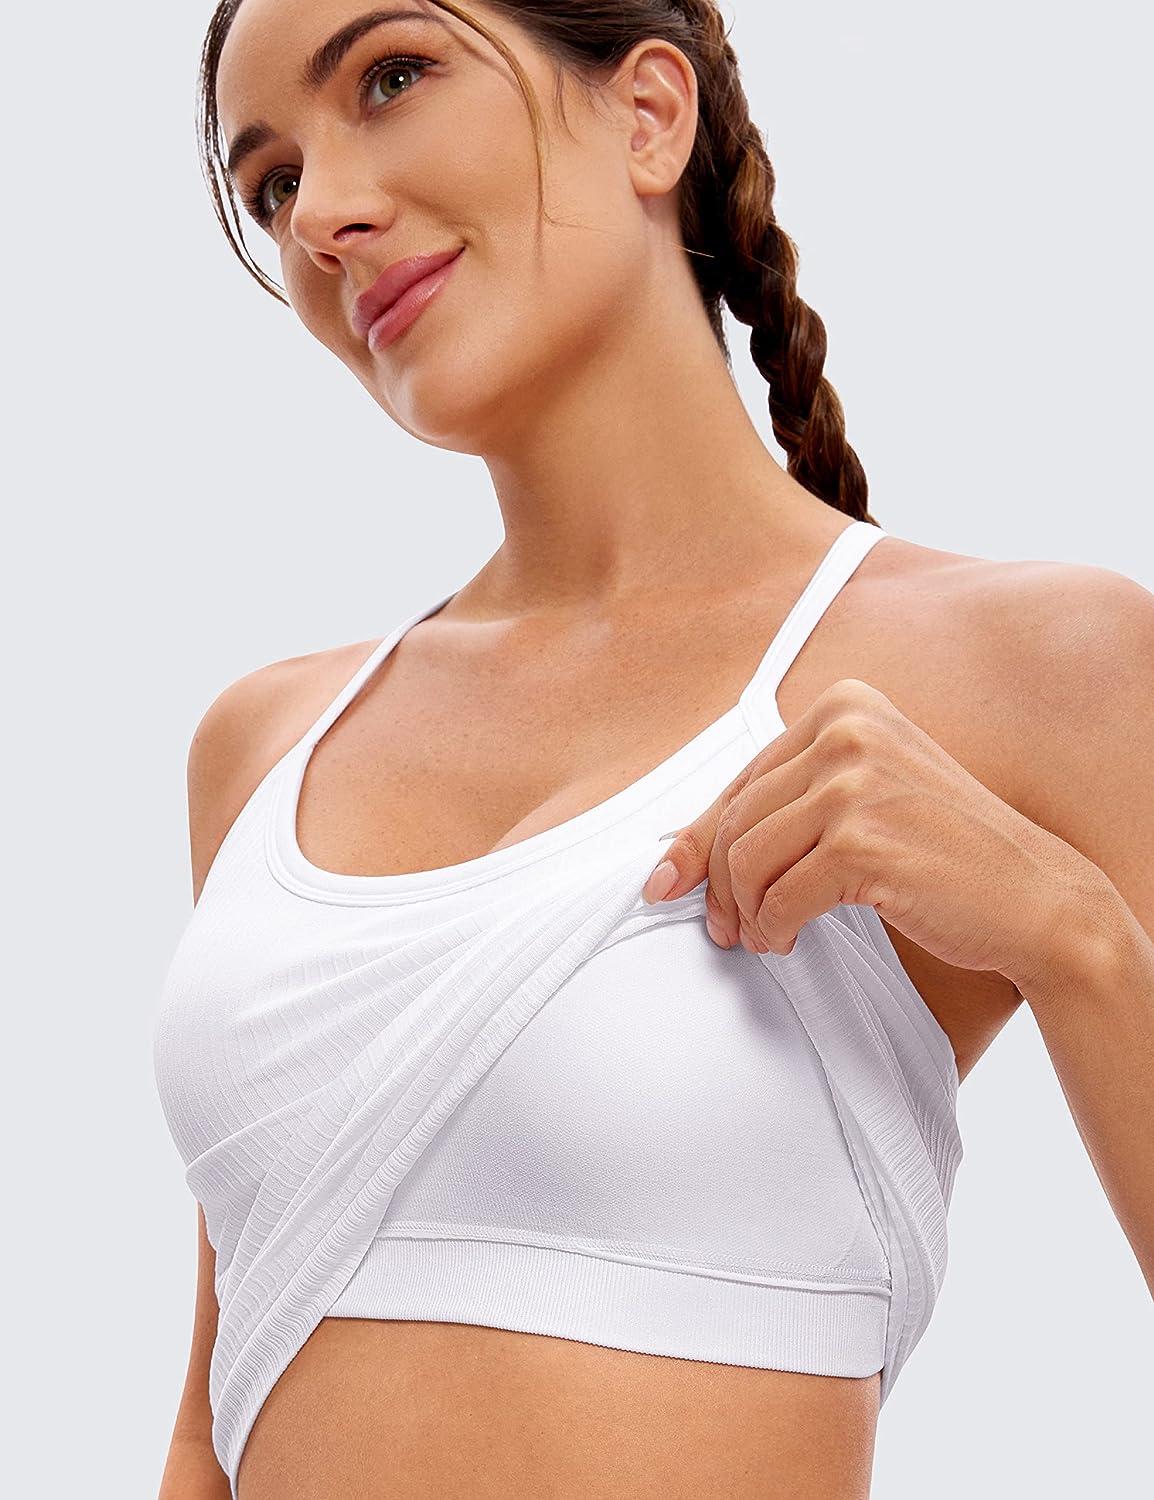 Workout Tank Tops for Women with Built in Bra Athletic Camisole